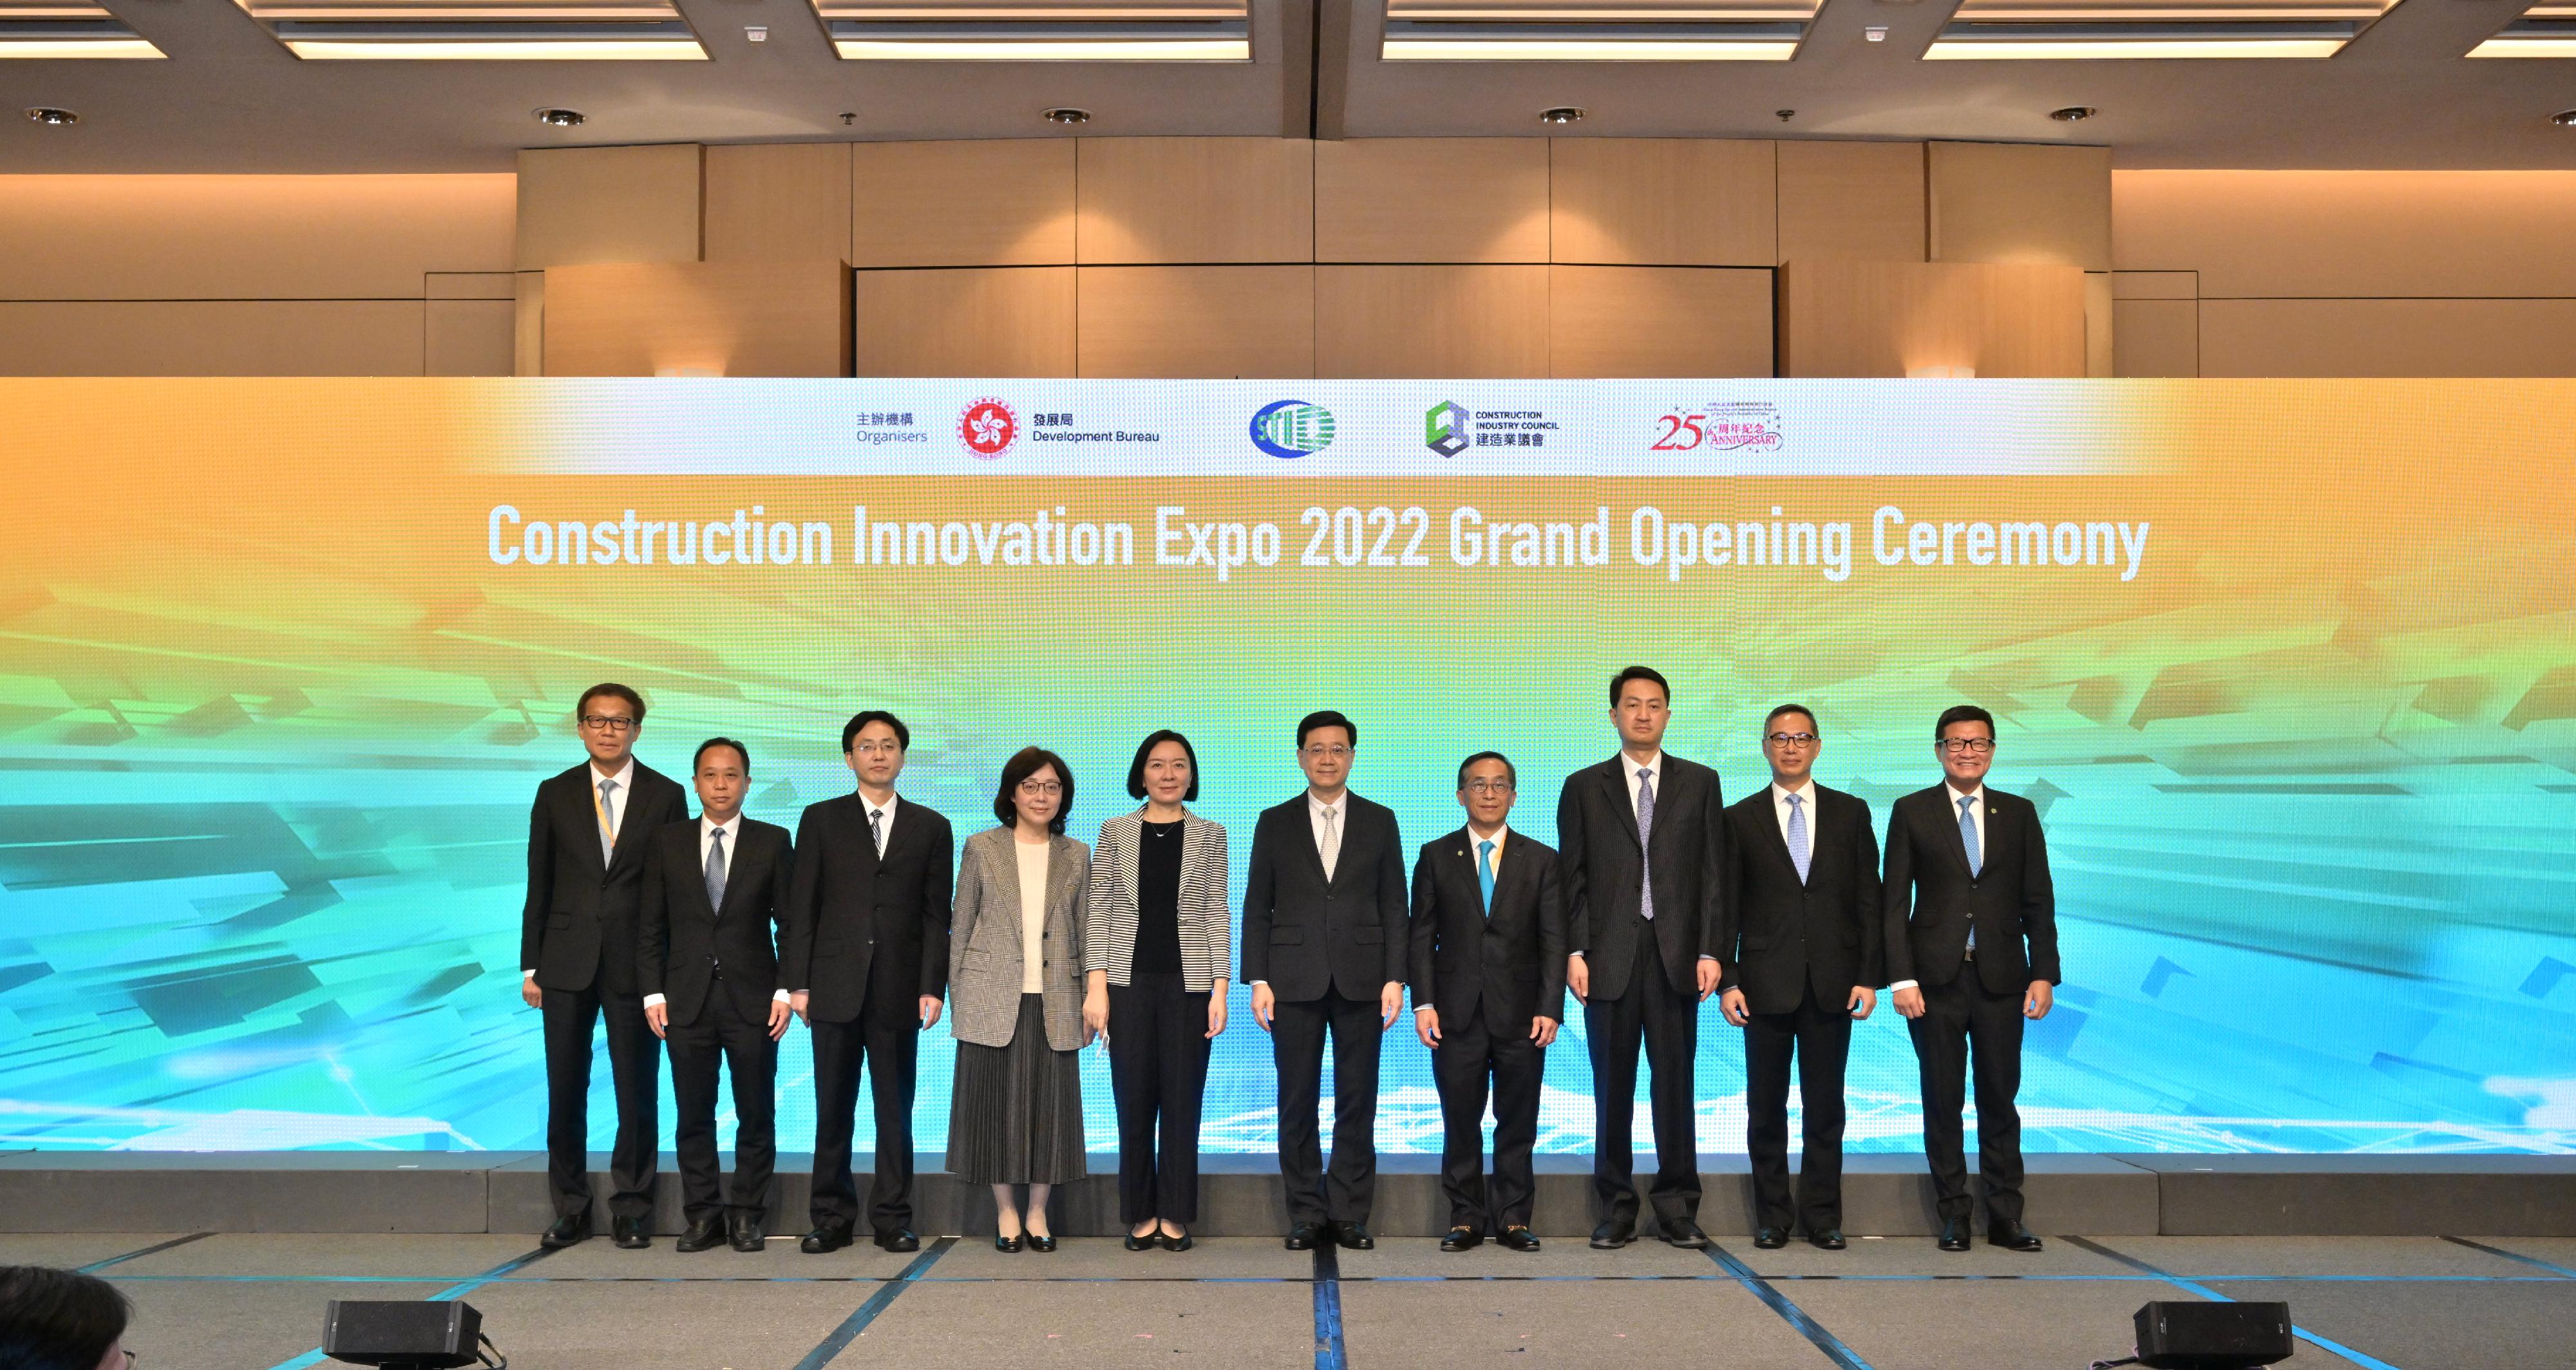 The Chief Executive, Mr John Lee, attended the Construction Innovation Expo 2022 Grand Opening Ceremony today (December 13). Photo shows Mr Lee (fifth right); Deputy Director of the Liaison Office of the Central People's Government in the Hong Kong Special Administrative Region Ms Lu Xinning (fifth left); the Director-General of the Department of the Construction Market Supervision of the Ministry of the Housing and Urban-Rural Development of the People's Republic of China, Mr Zeng Xianxin (third right); the Secretary for Development, Ms Bernadette Linn (fourth left); the Chairman of the Construction Industry Council, Mr Thomas Ho (fourth right), and other guests at the ceremony.